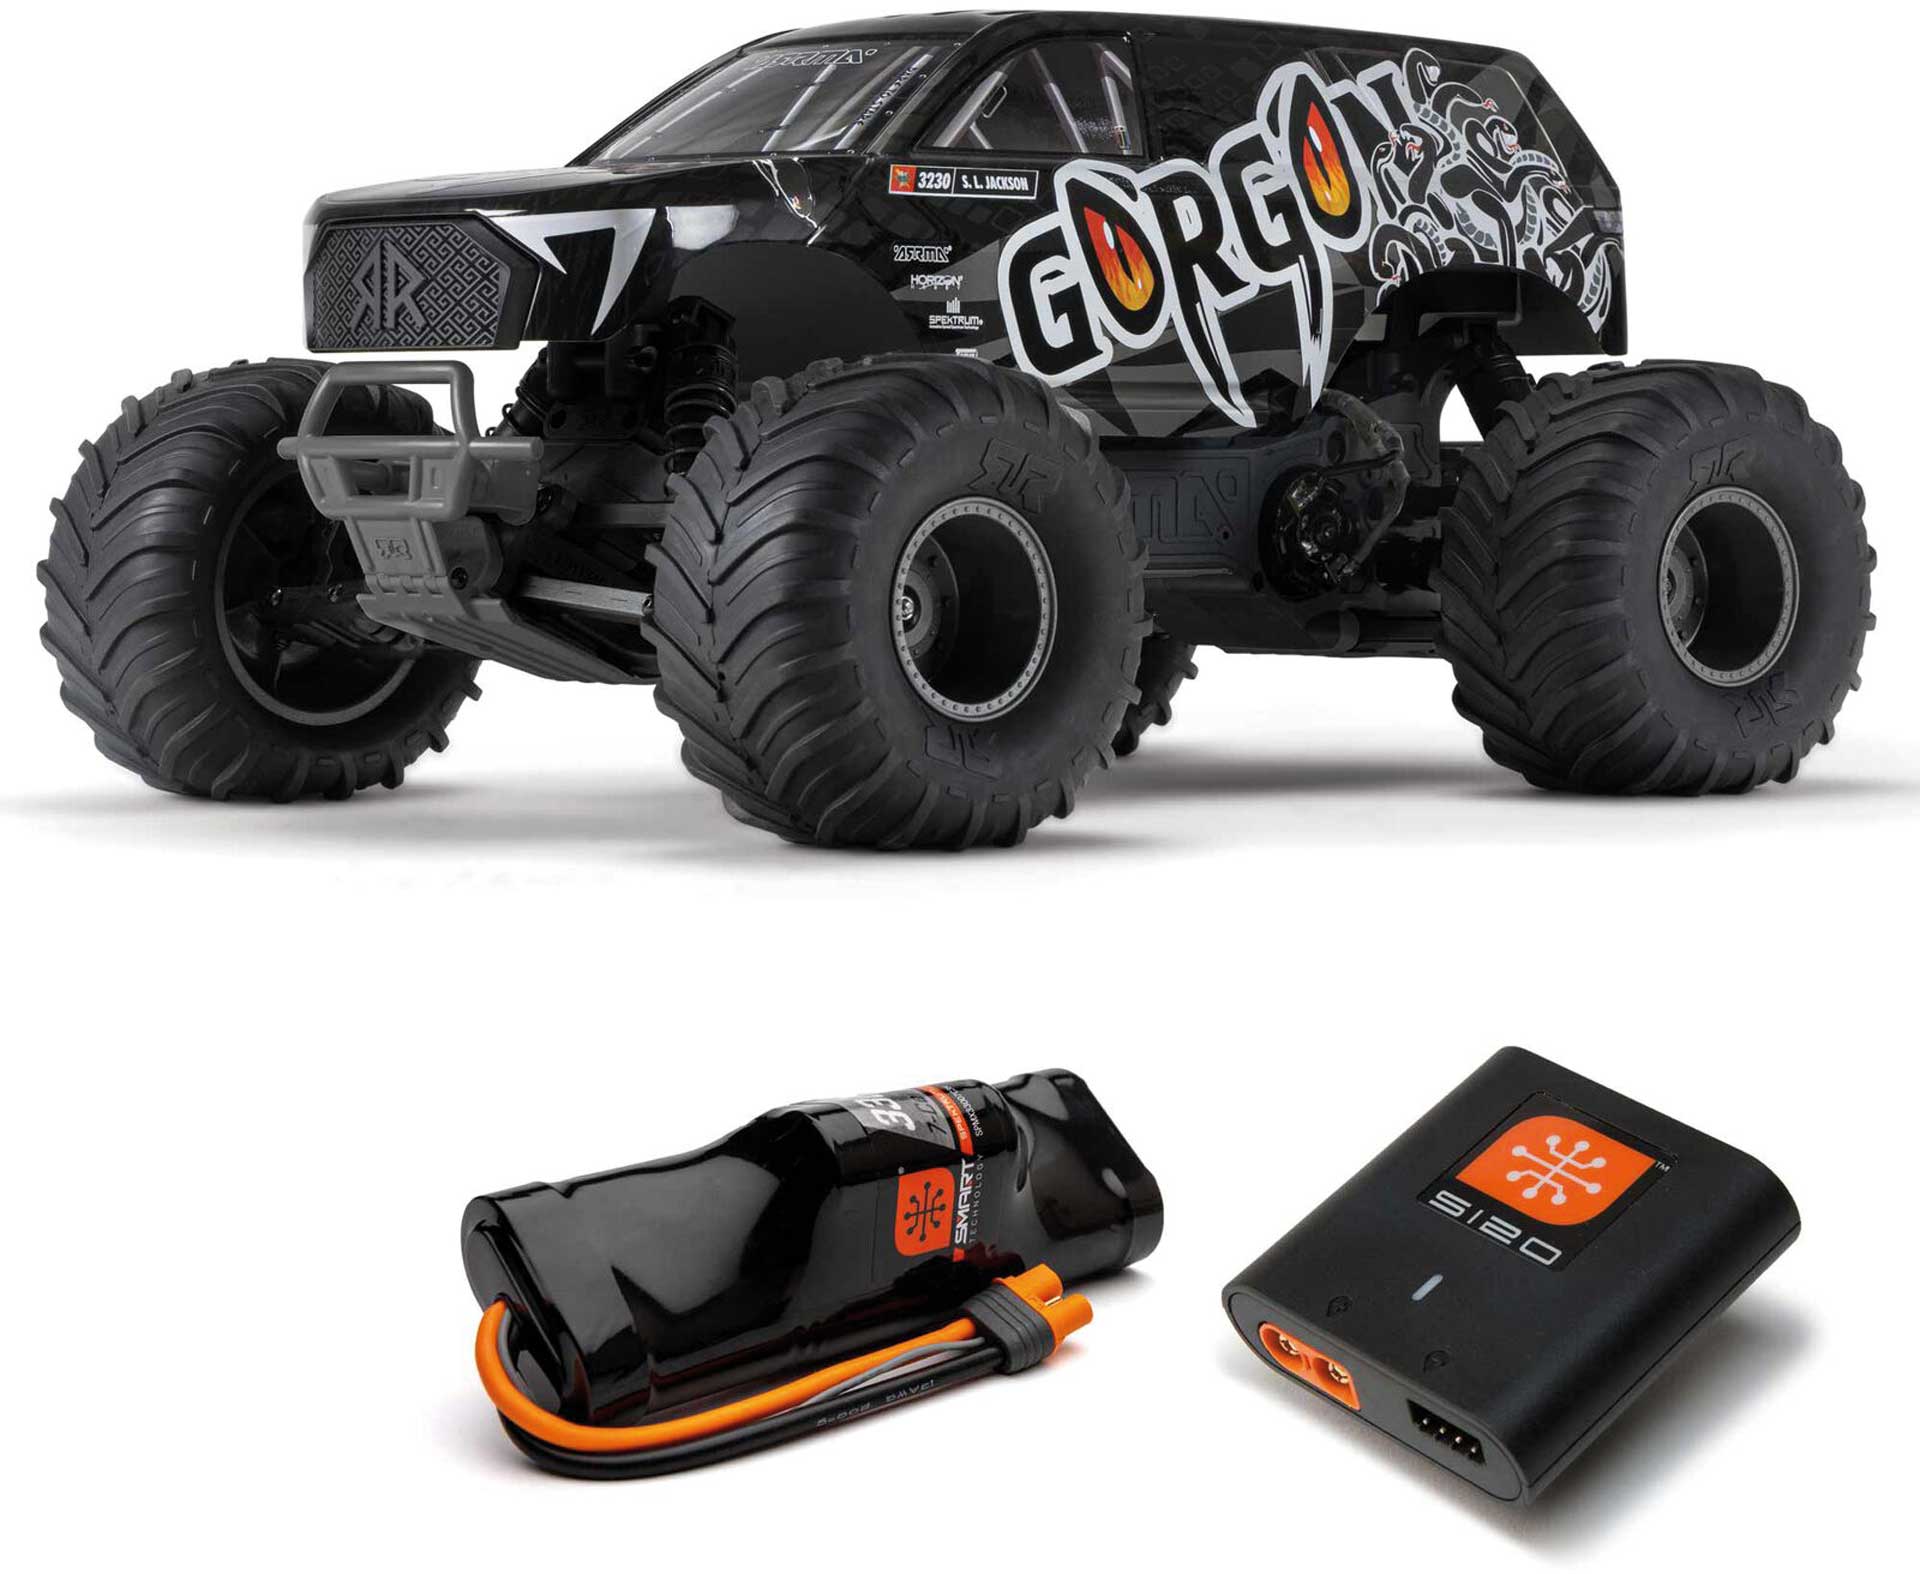 ARRMA 1/10 GORGON 4X2 MEGA 550 Brushed Monster Truck Ready-To-Assemble Kit incl. battery and charger